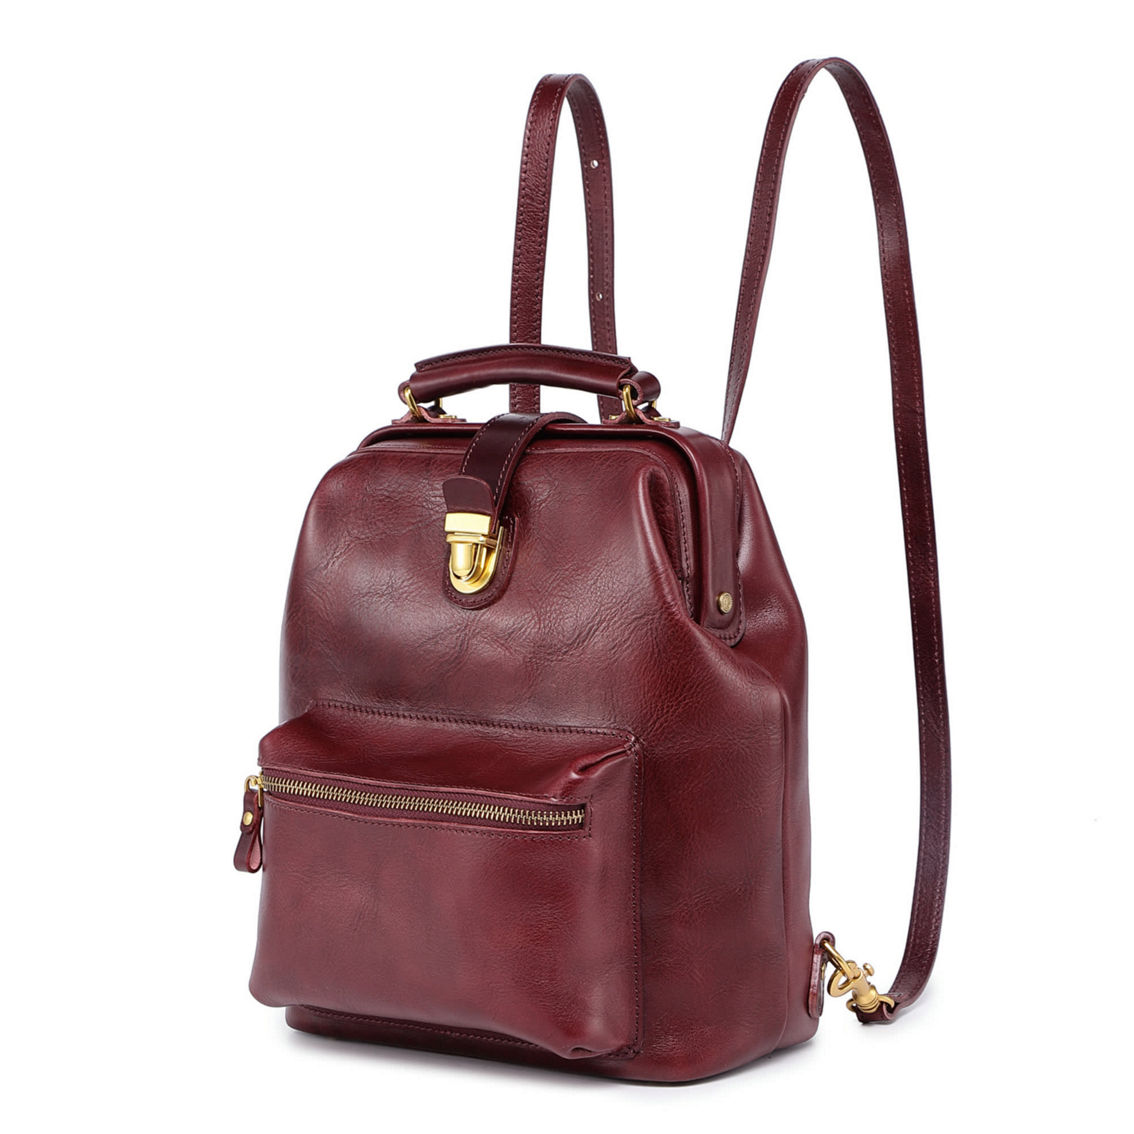 Old Trend Doctor Convertible Leather Backpack - Image 2 of 5